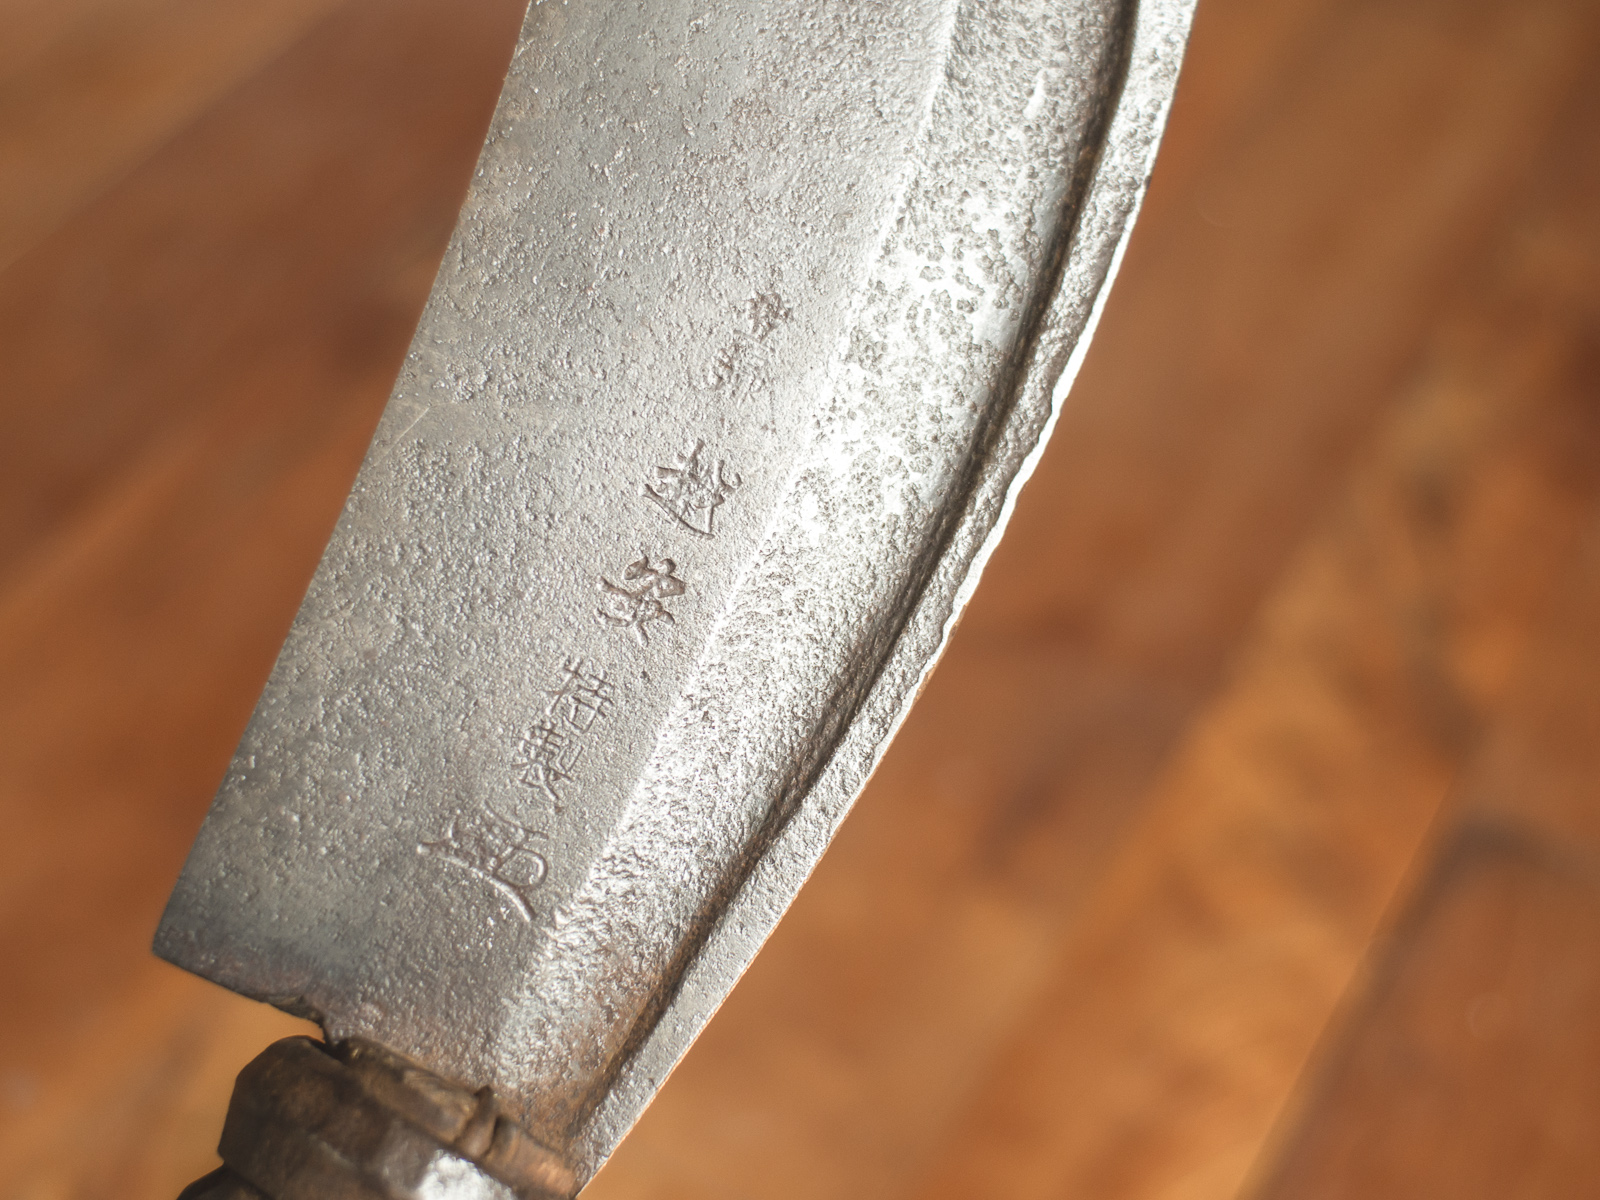 Island Blacksmith: Traditionally crafted knives from reclaimed steel.